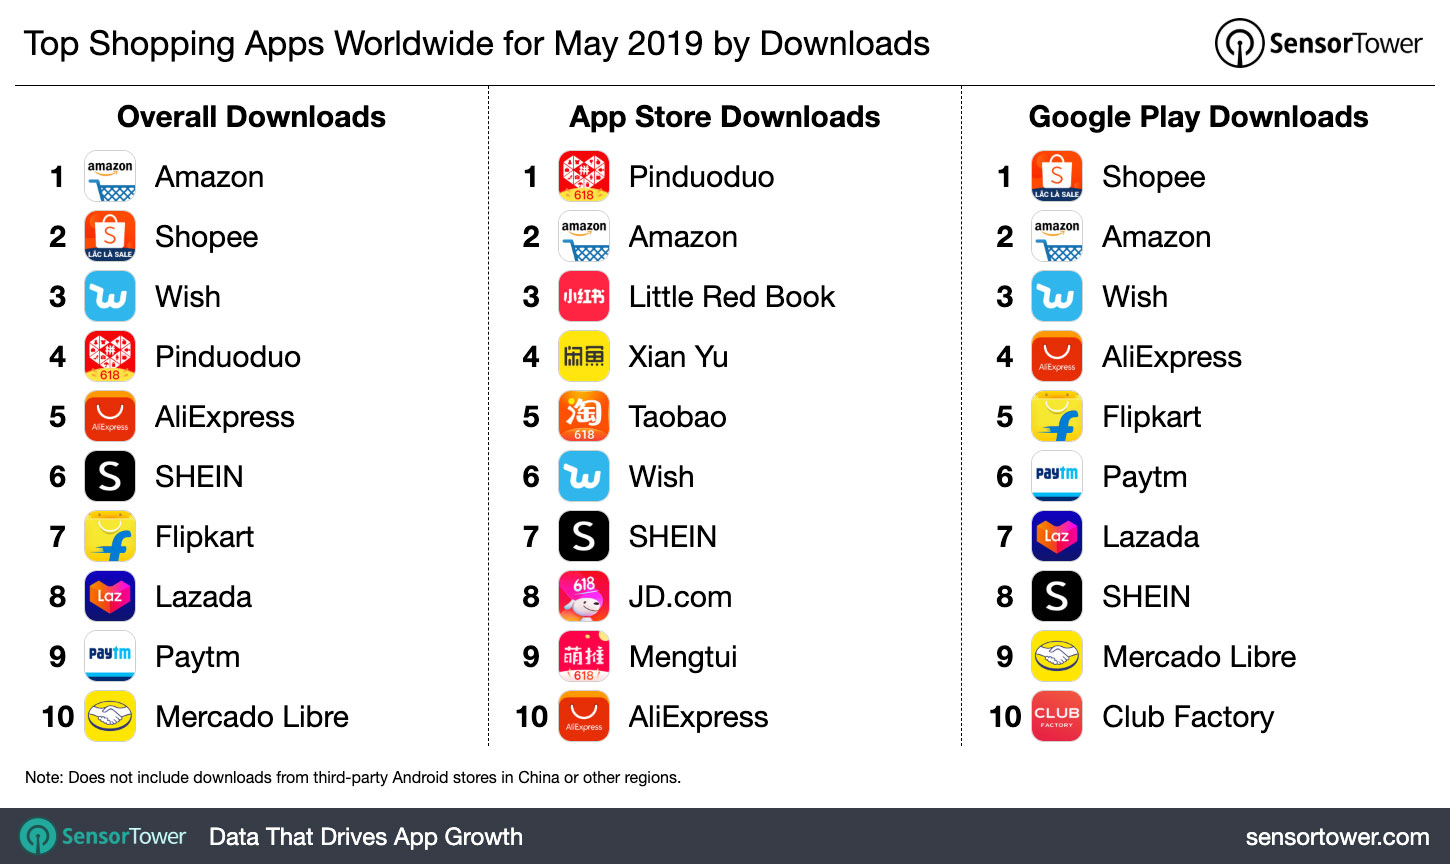 Top Shopping Apps Worldwide for May 2019 by Downloads